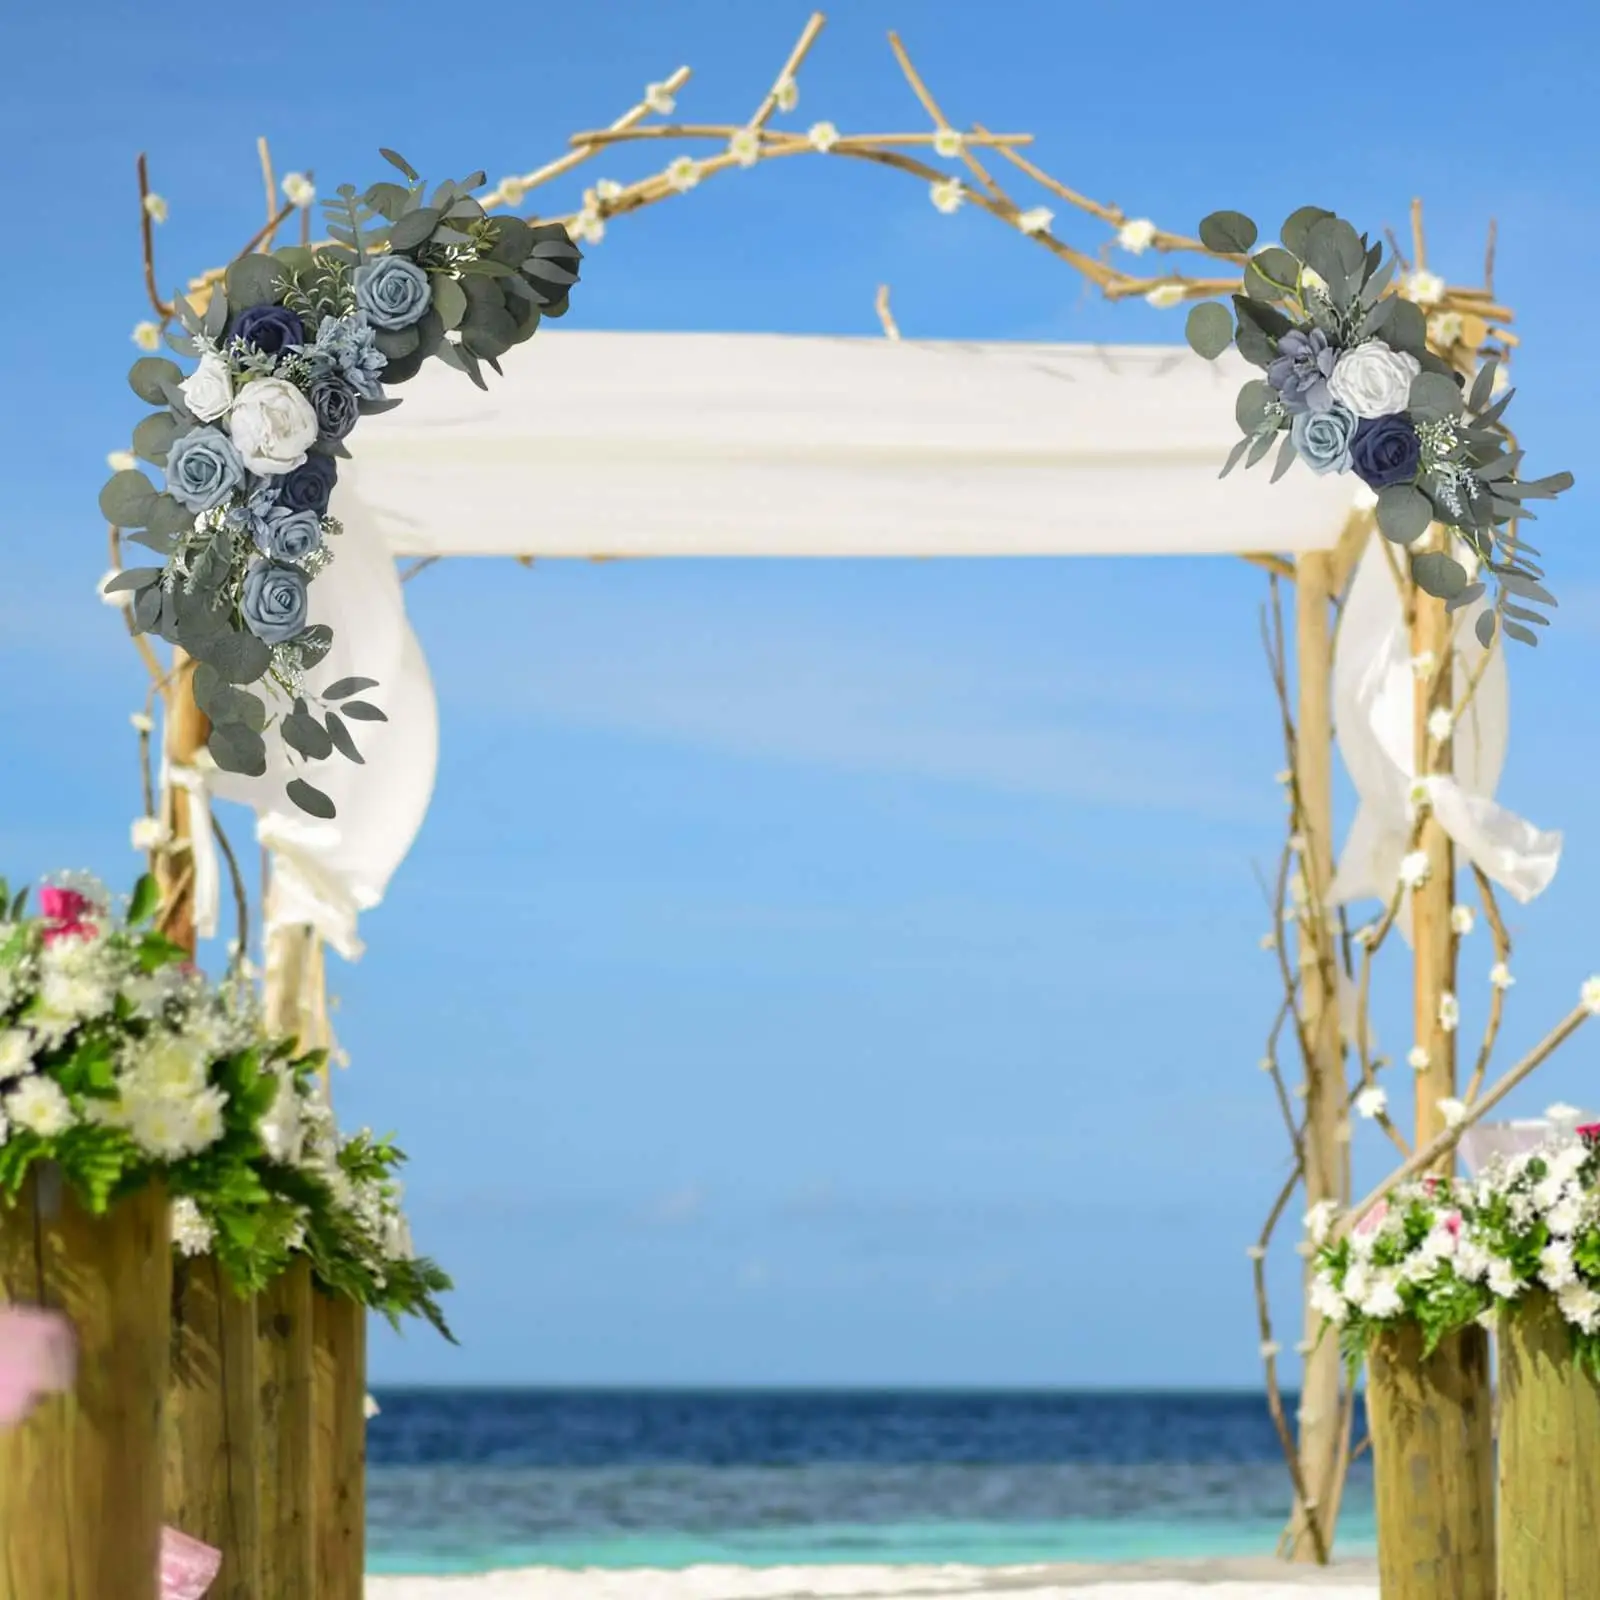 2x Hanging artificial flowers Swag Garland for Wedding Backdrop Reception